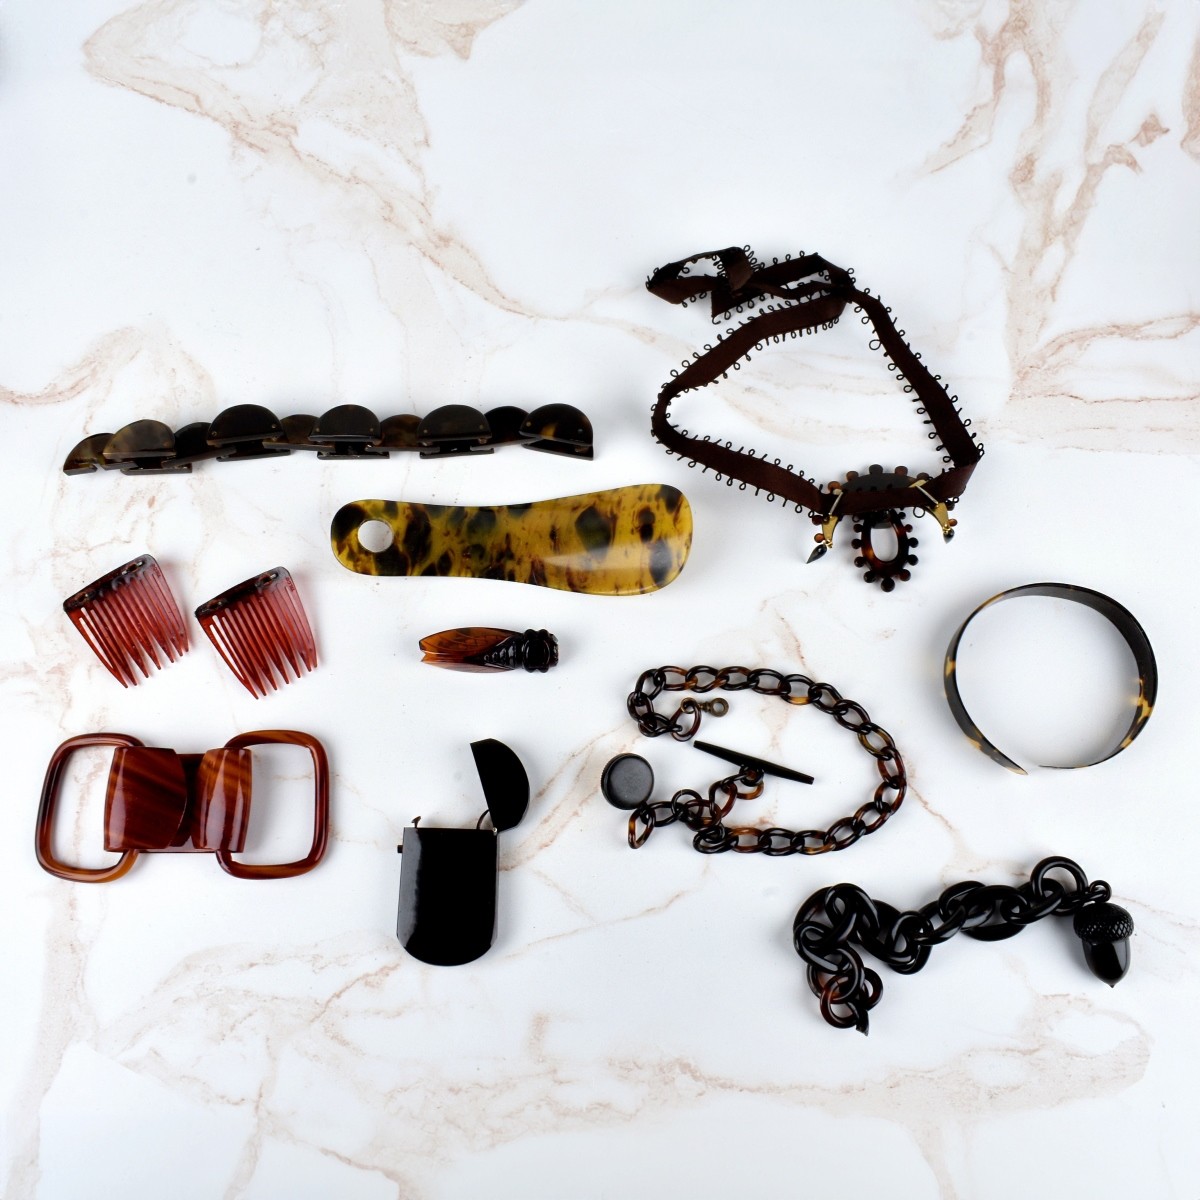 Assorted Accessories